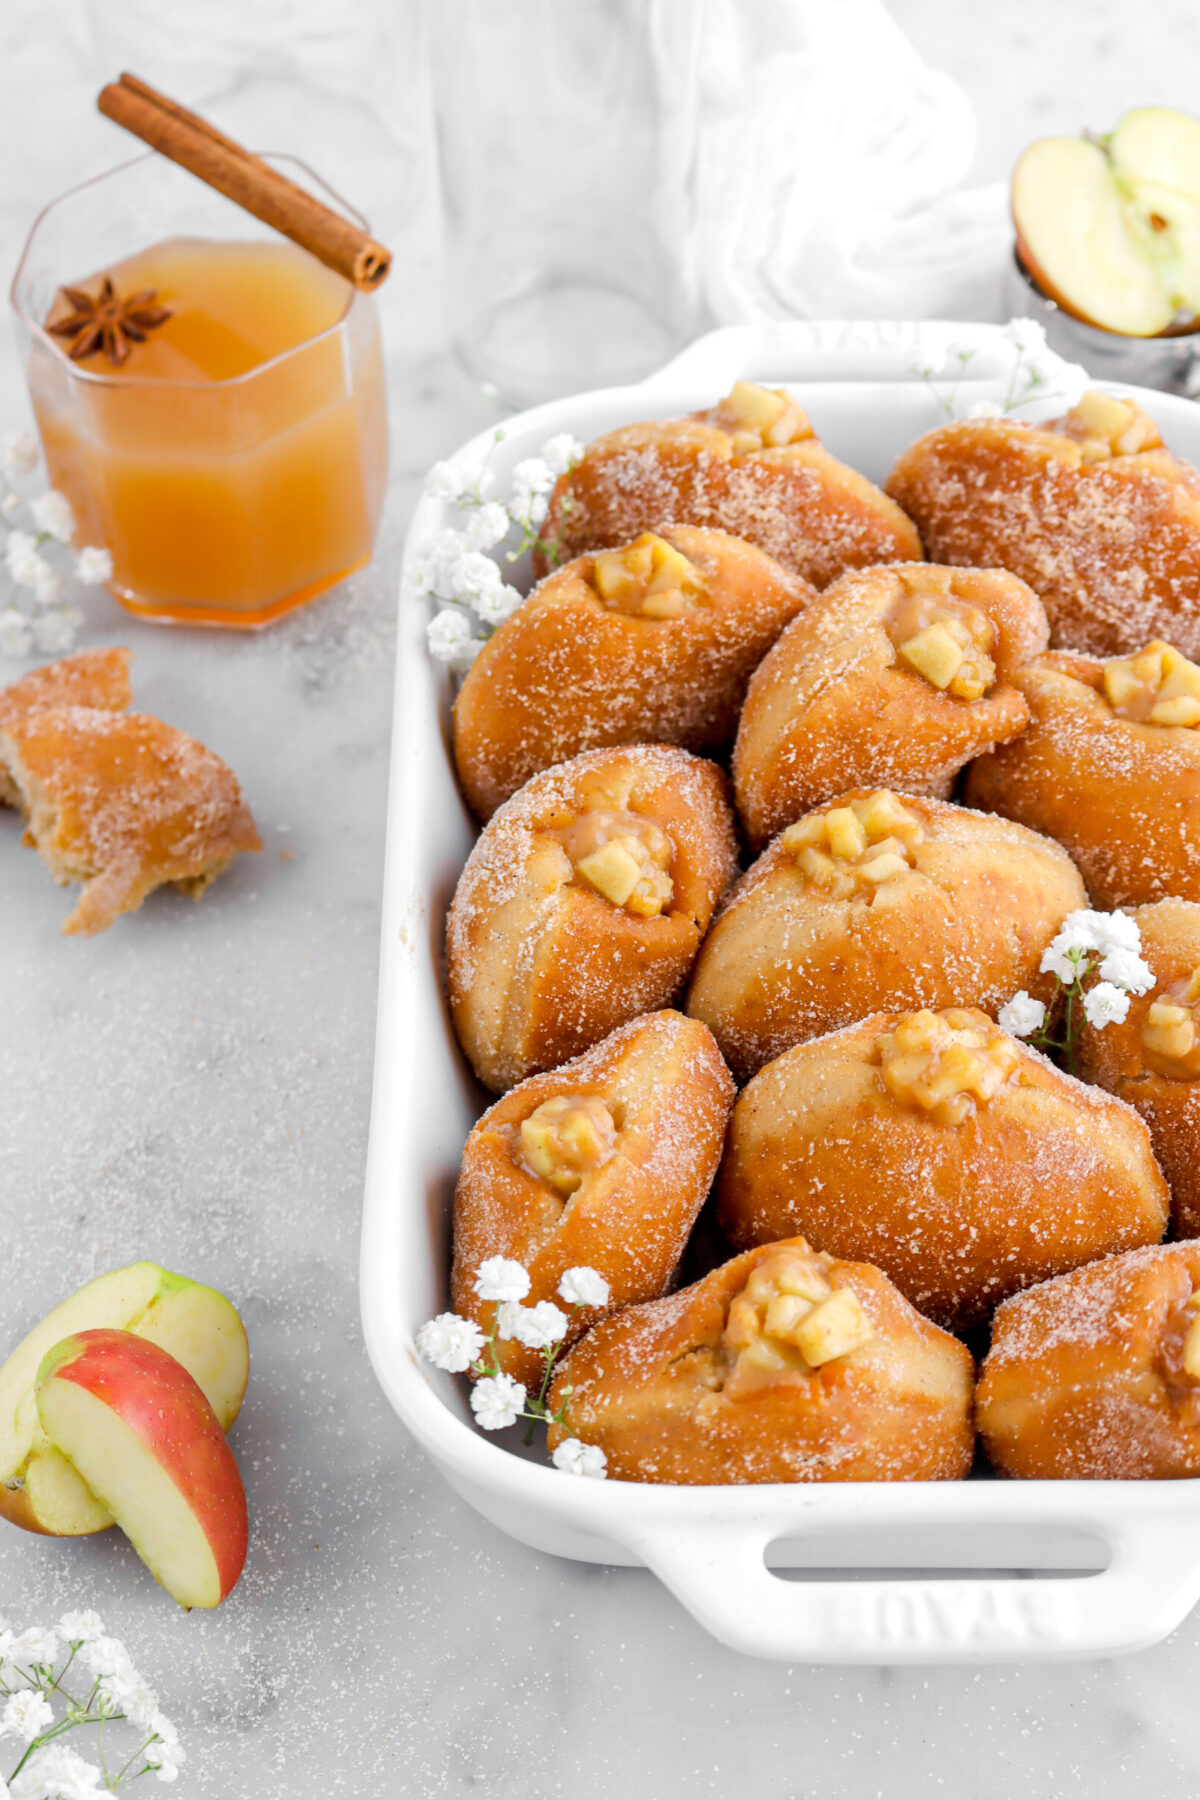 cropped image of apple pie filled doughnuts in white casserole on marble surface with apple slices and a glass of cider beside.